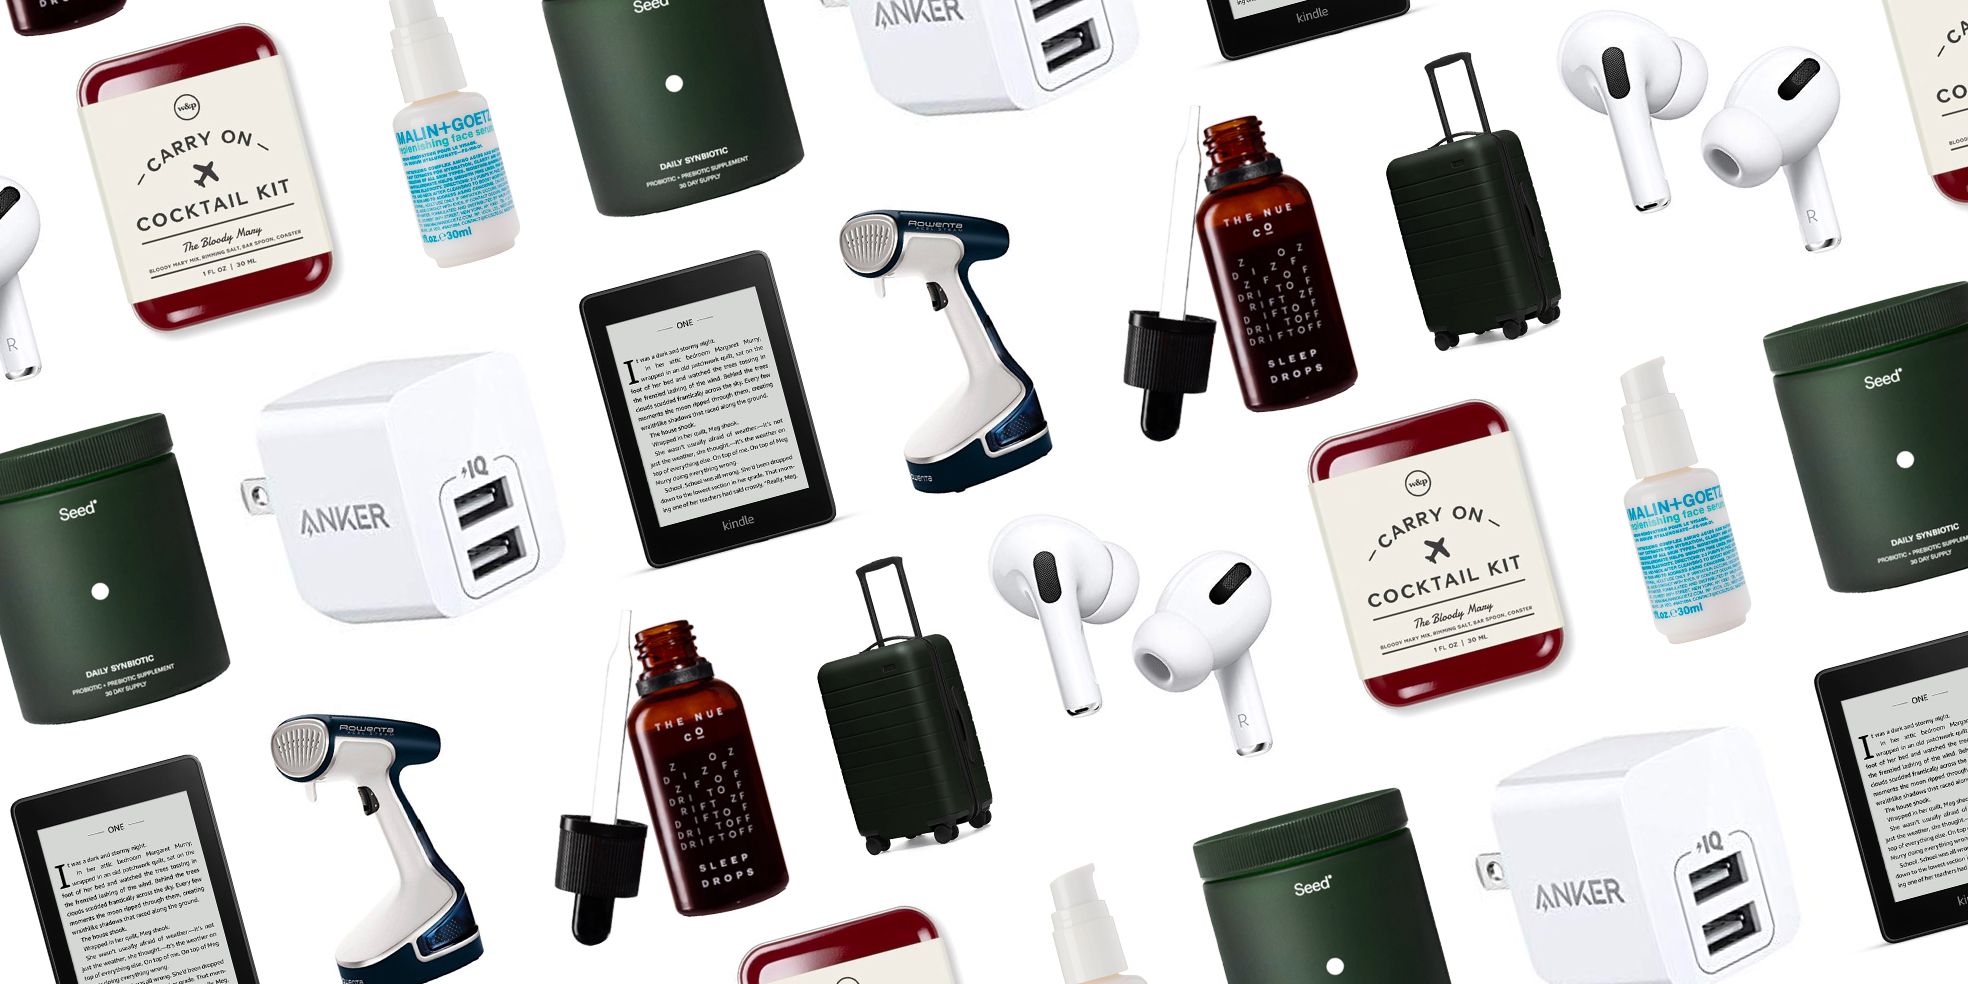 The Best Holiday Gadgets for Men Money Can Buy